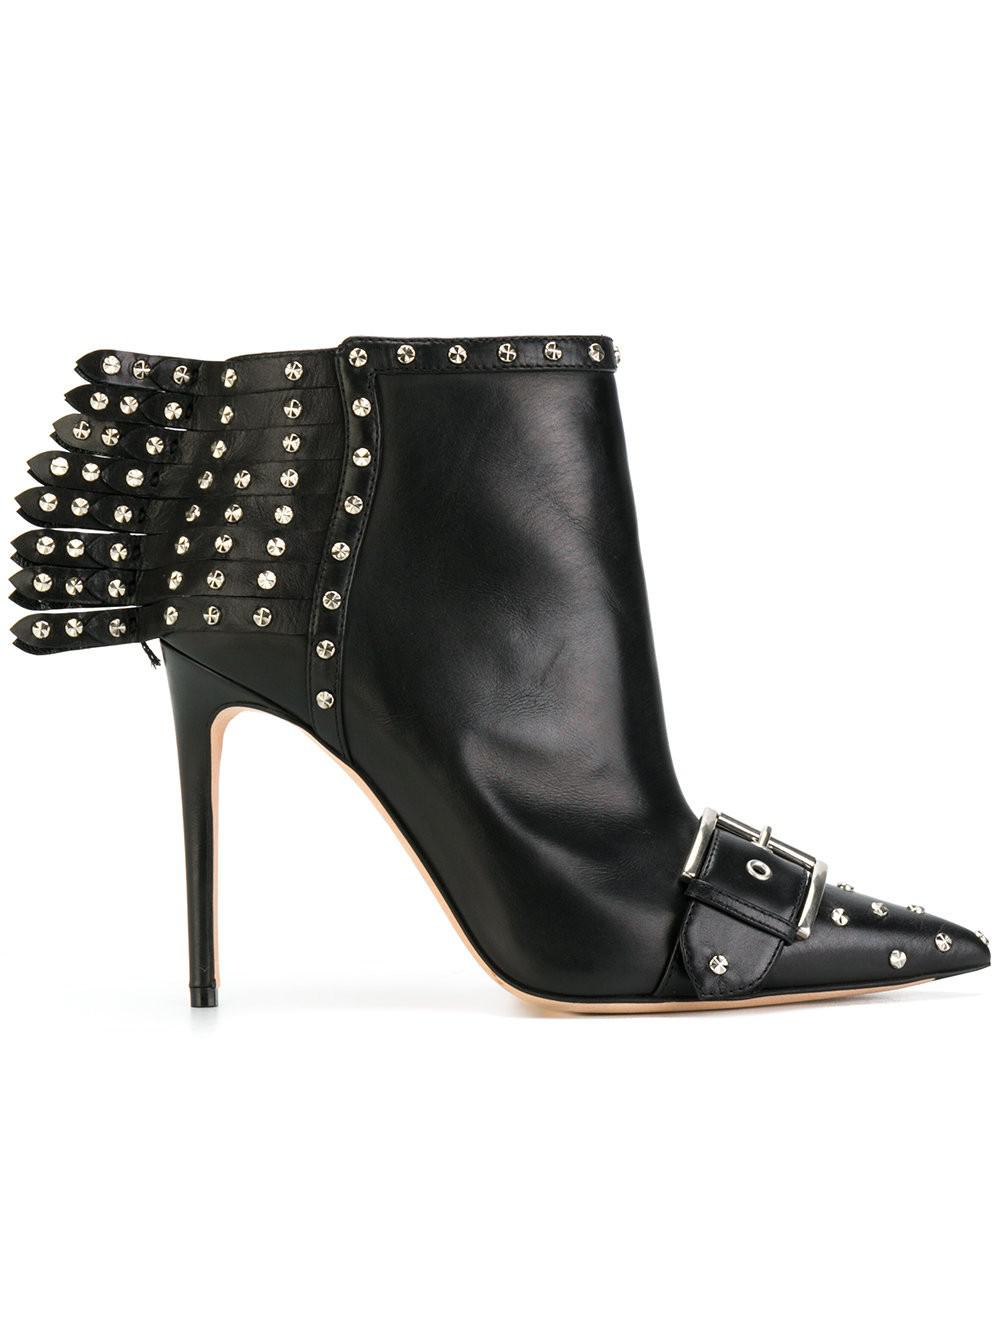 Alexander McQueen Leather Studded Fringe Heel Ankle Boots in Black - Lyst